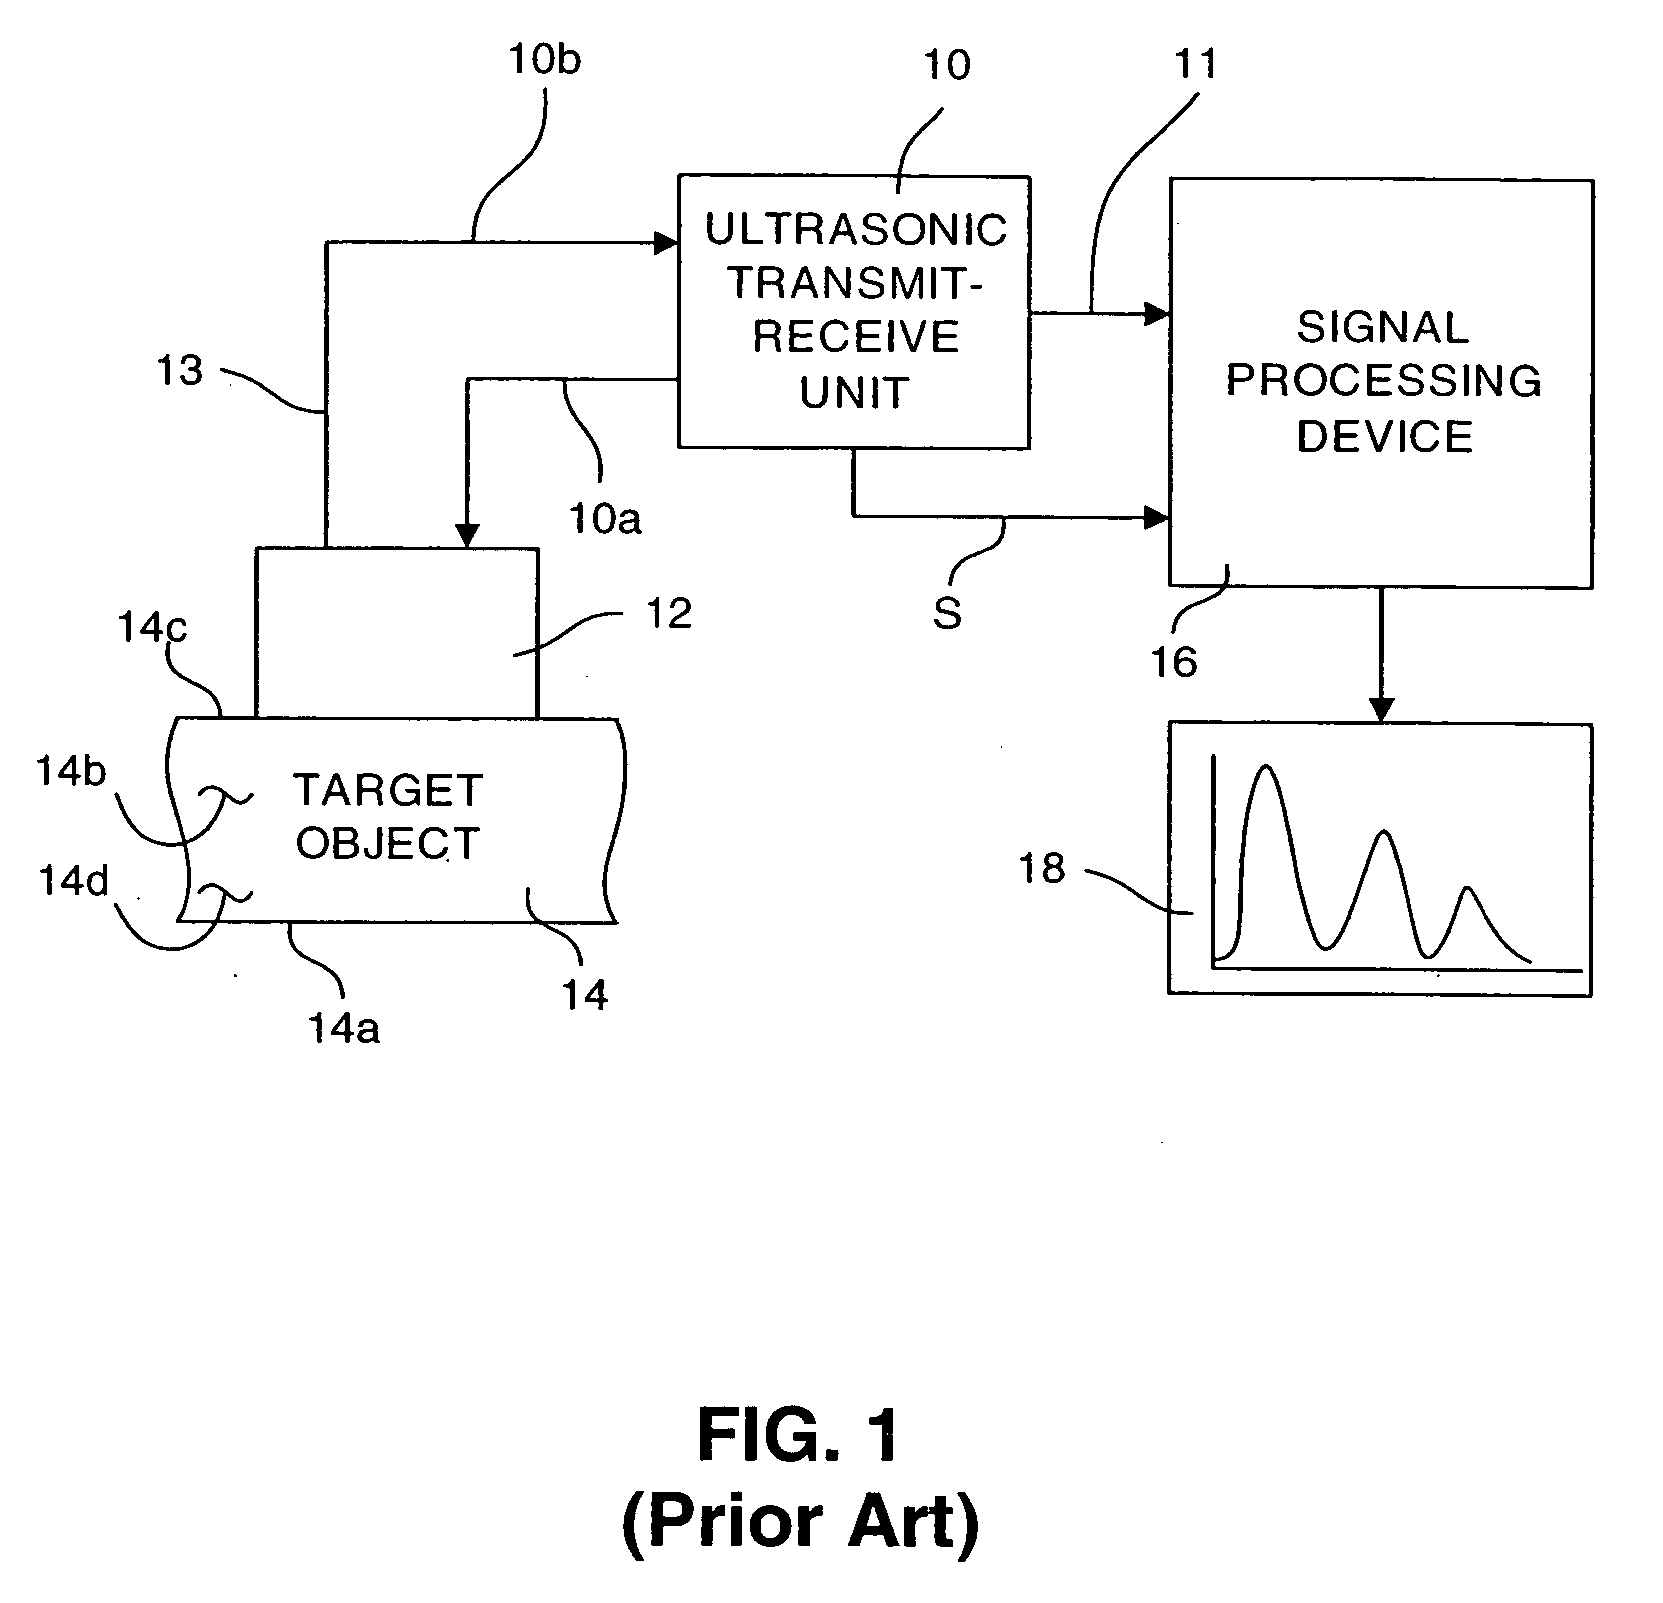 Ultrasonic fault detection system using a high dynamic range analog to digital conversion system